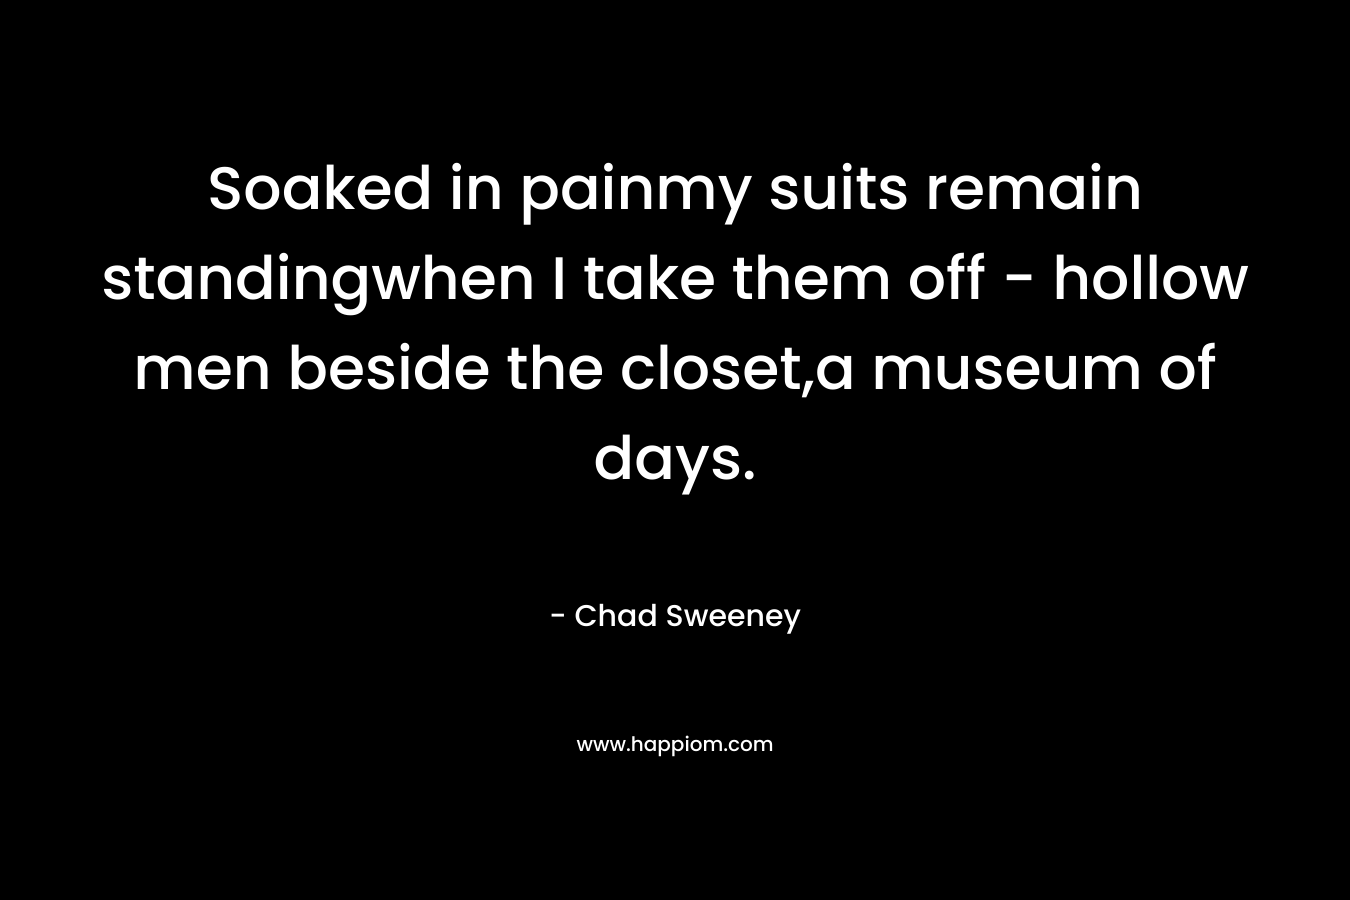 Soaked in painmy suits remain standingwhen I take them off – hollow men beside the closet,a museum of days. – Chad Sweeney